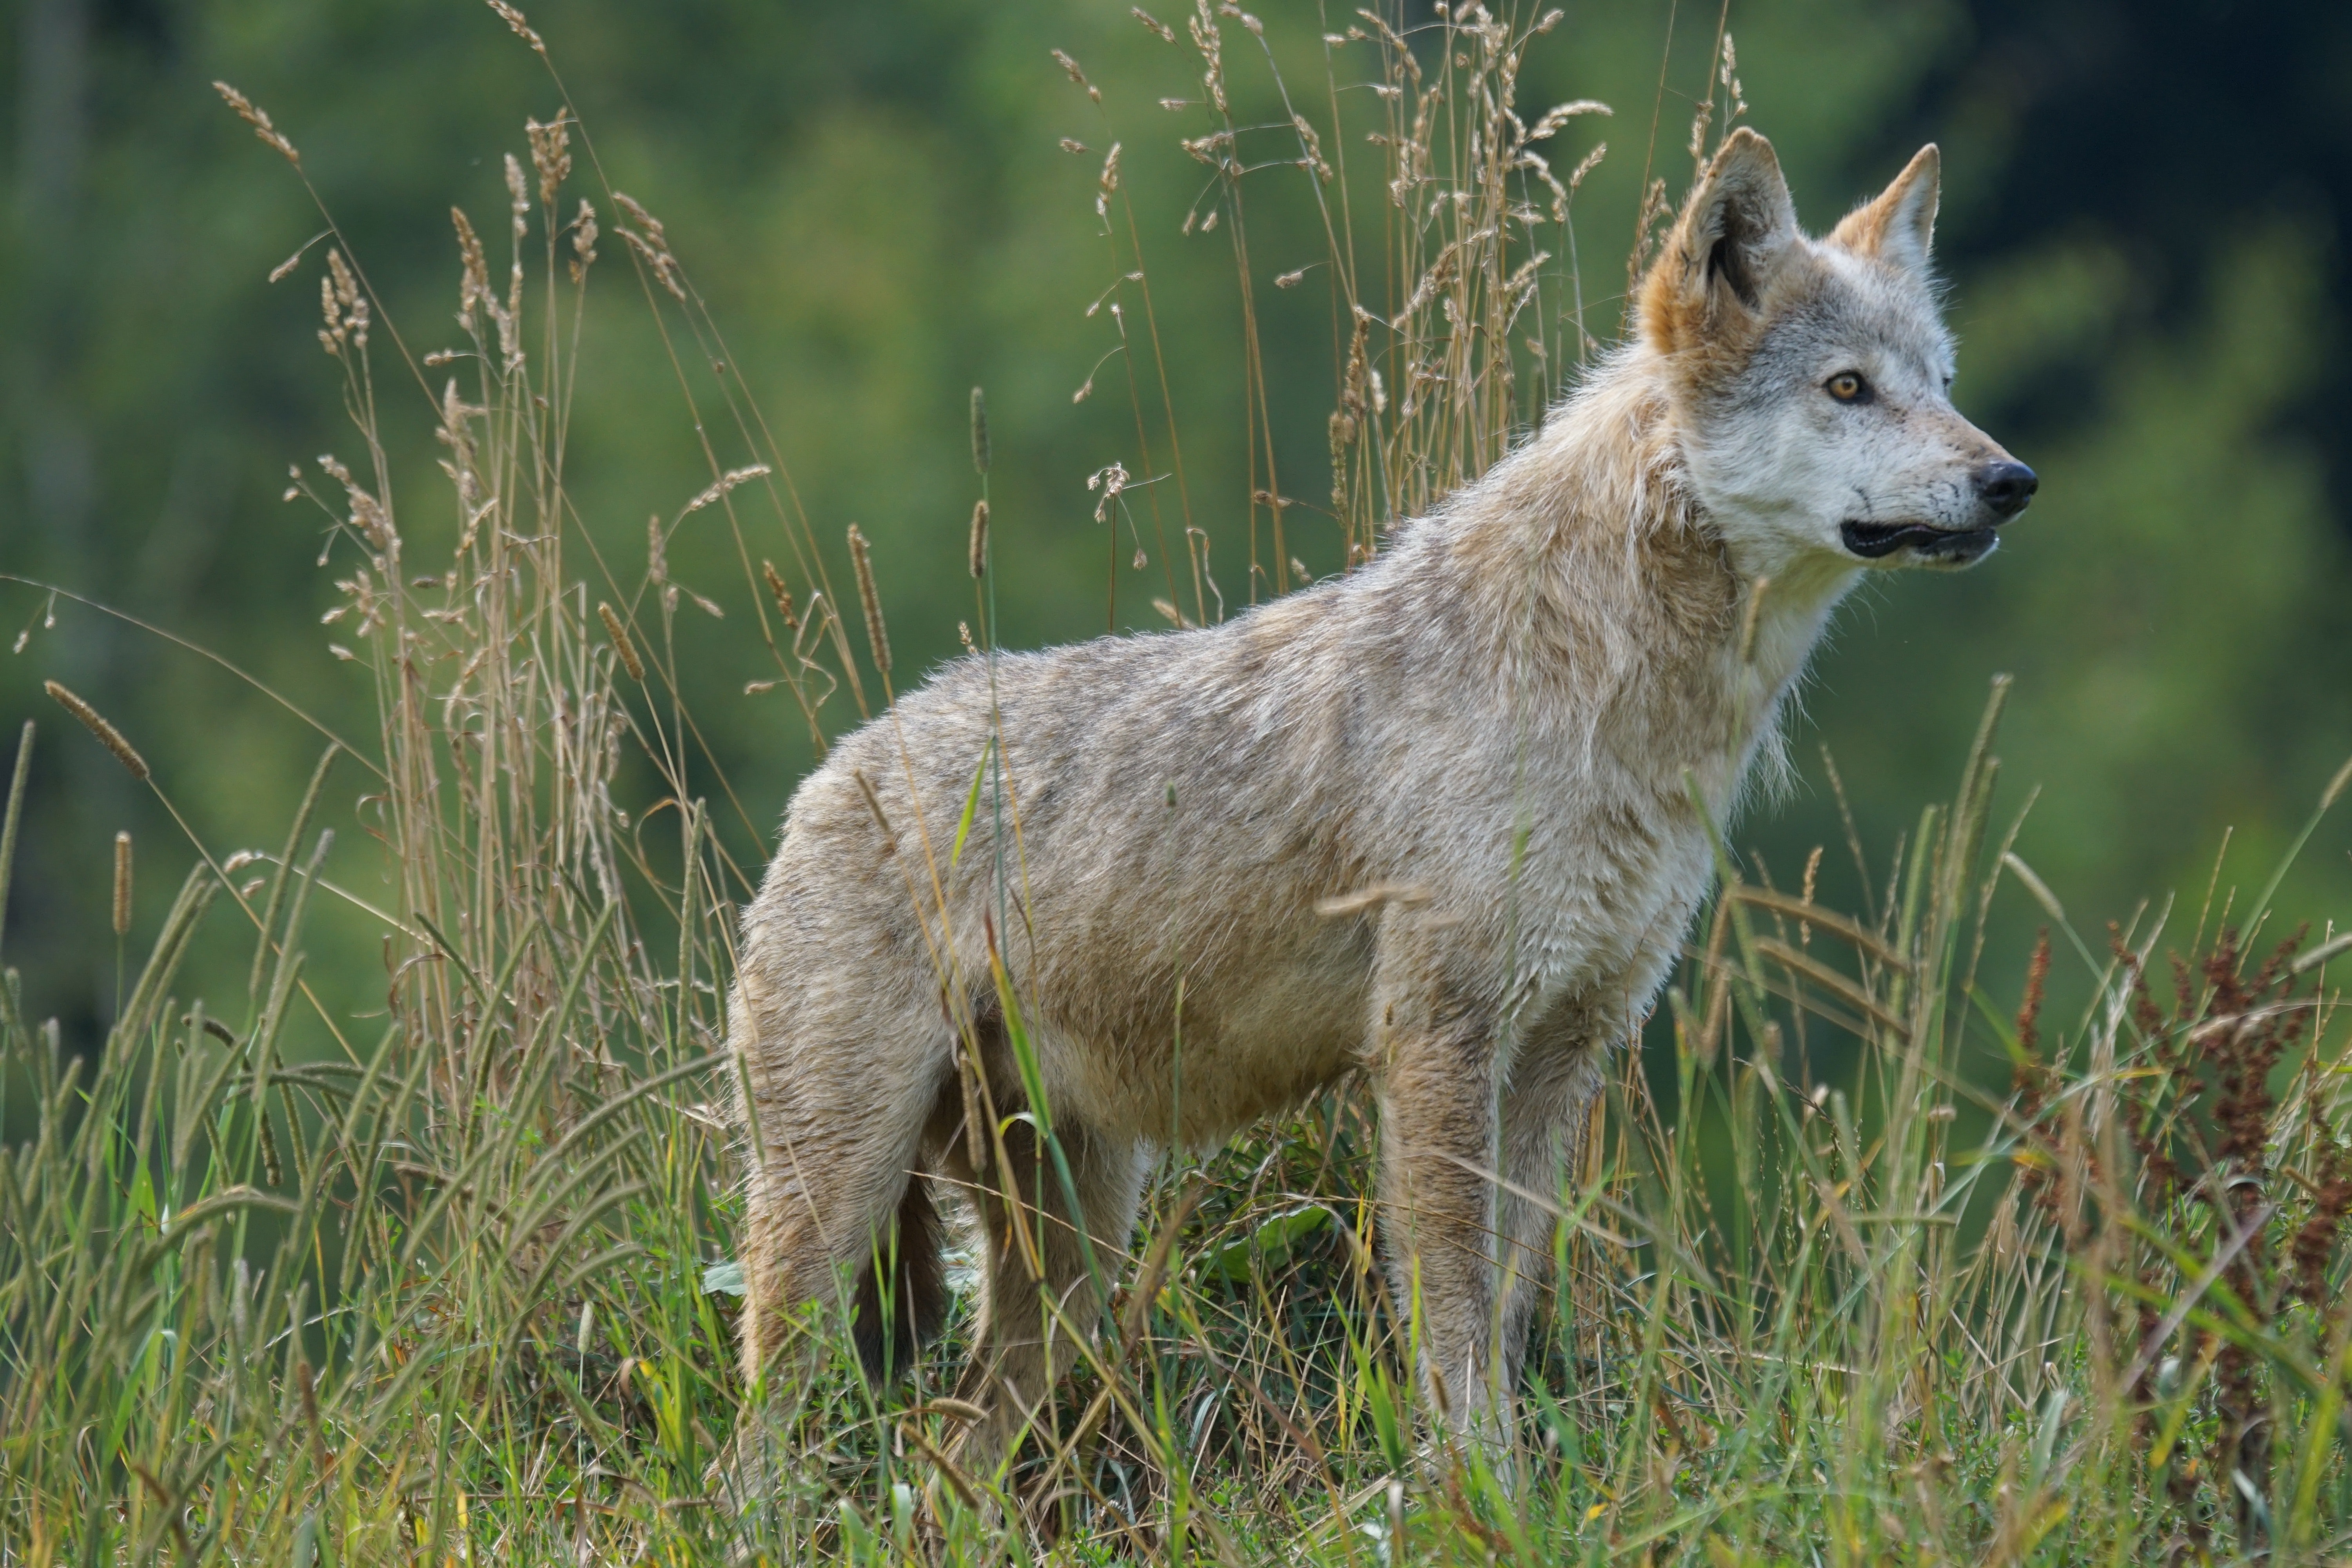 Gray and white wolf on grass field looking during daytime photo